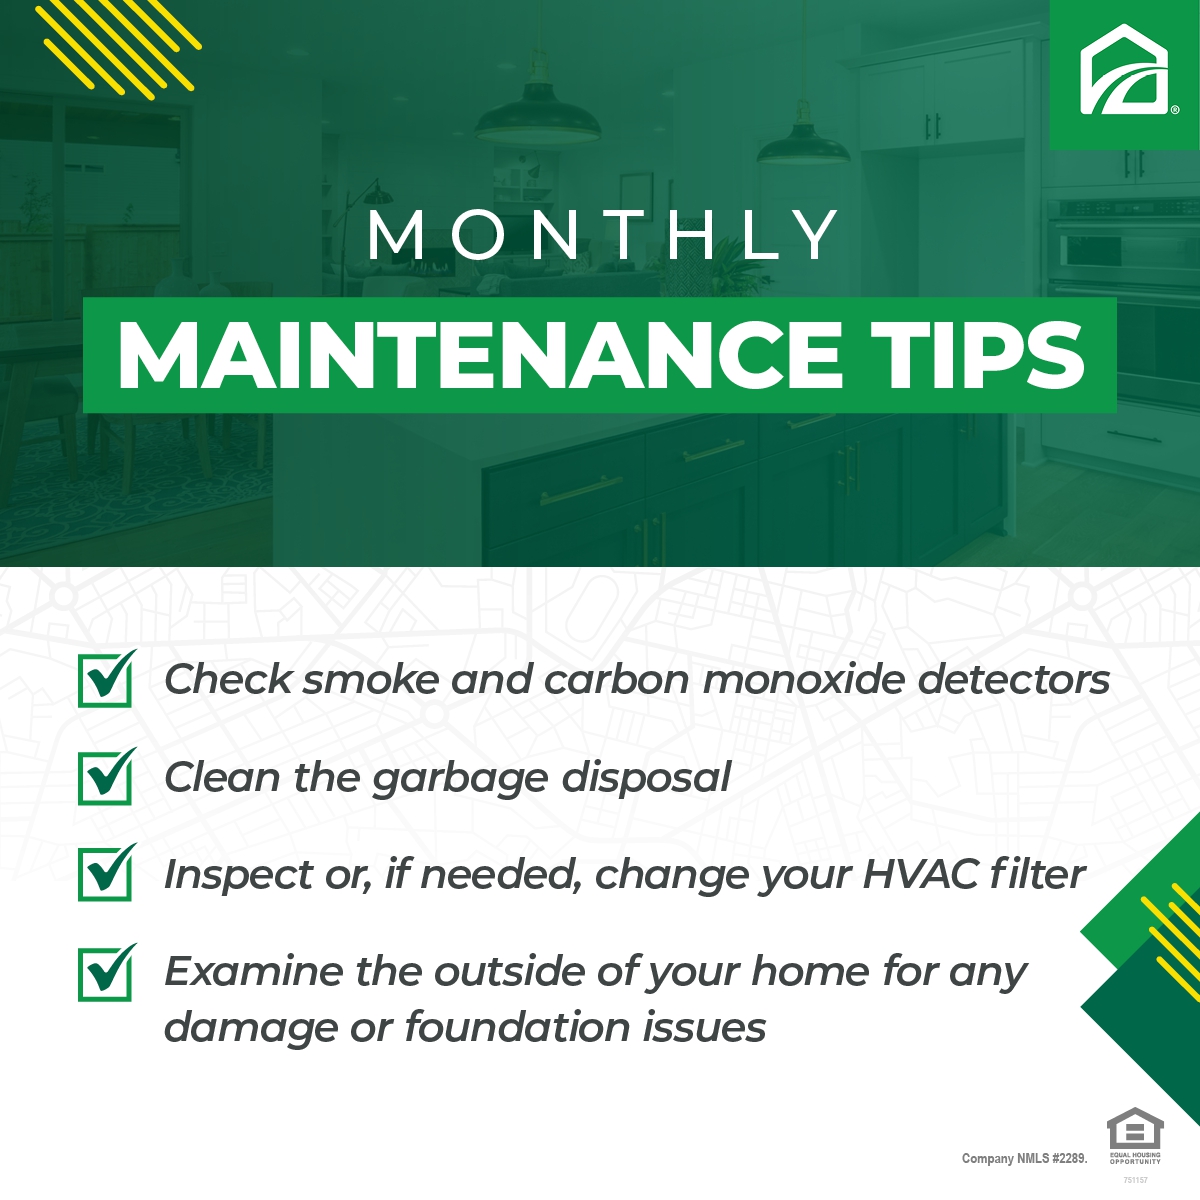 Did you know you should clean out your garbage disposal once a month? Check out more helpful tips for keeping your home in good order. We've got you covered!  #jerry_themortgageguy #mortgagetips #mortgage101 #yourloanexpert mobile.fairwaynow.com/homehub/signup…